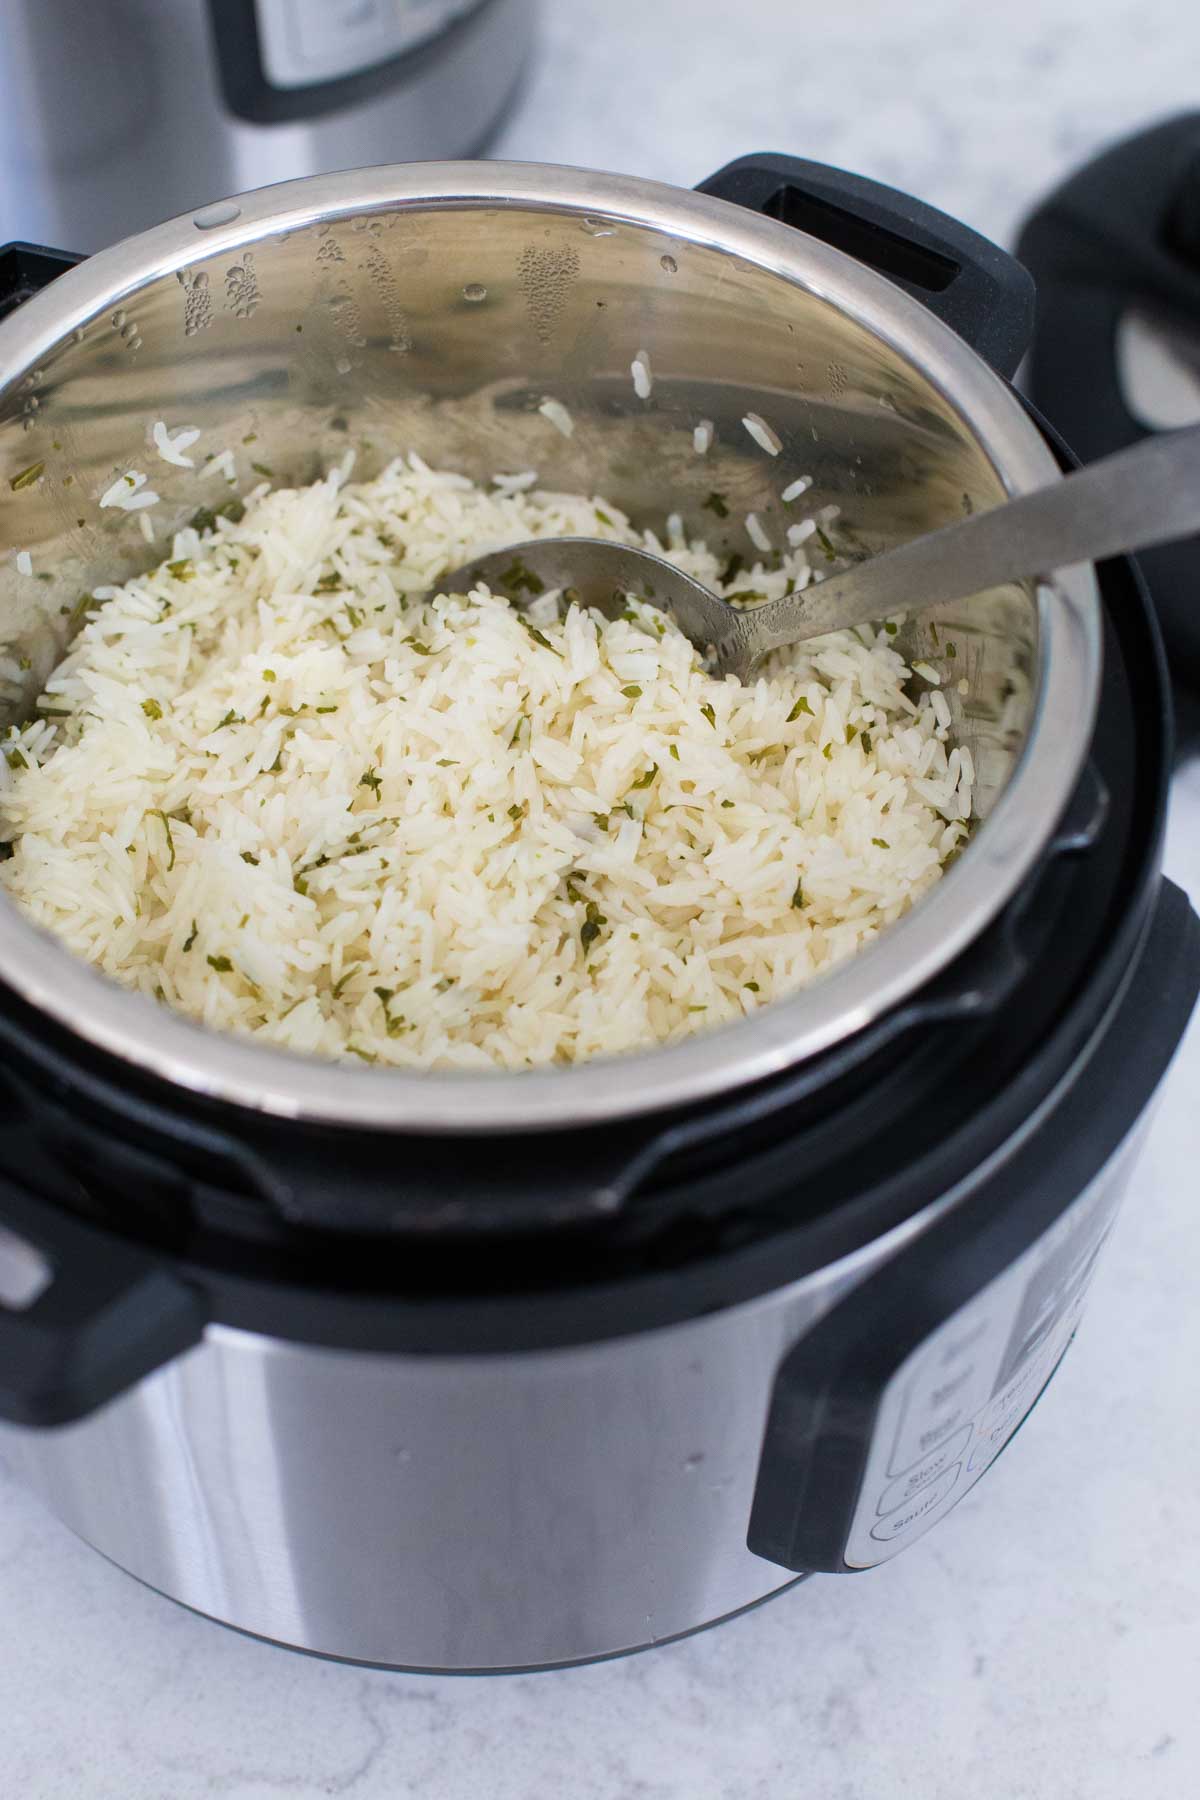 The finished herb butter rice is inside the Instant Pot, ready for serving.